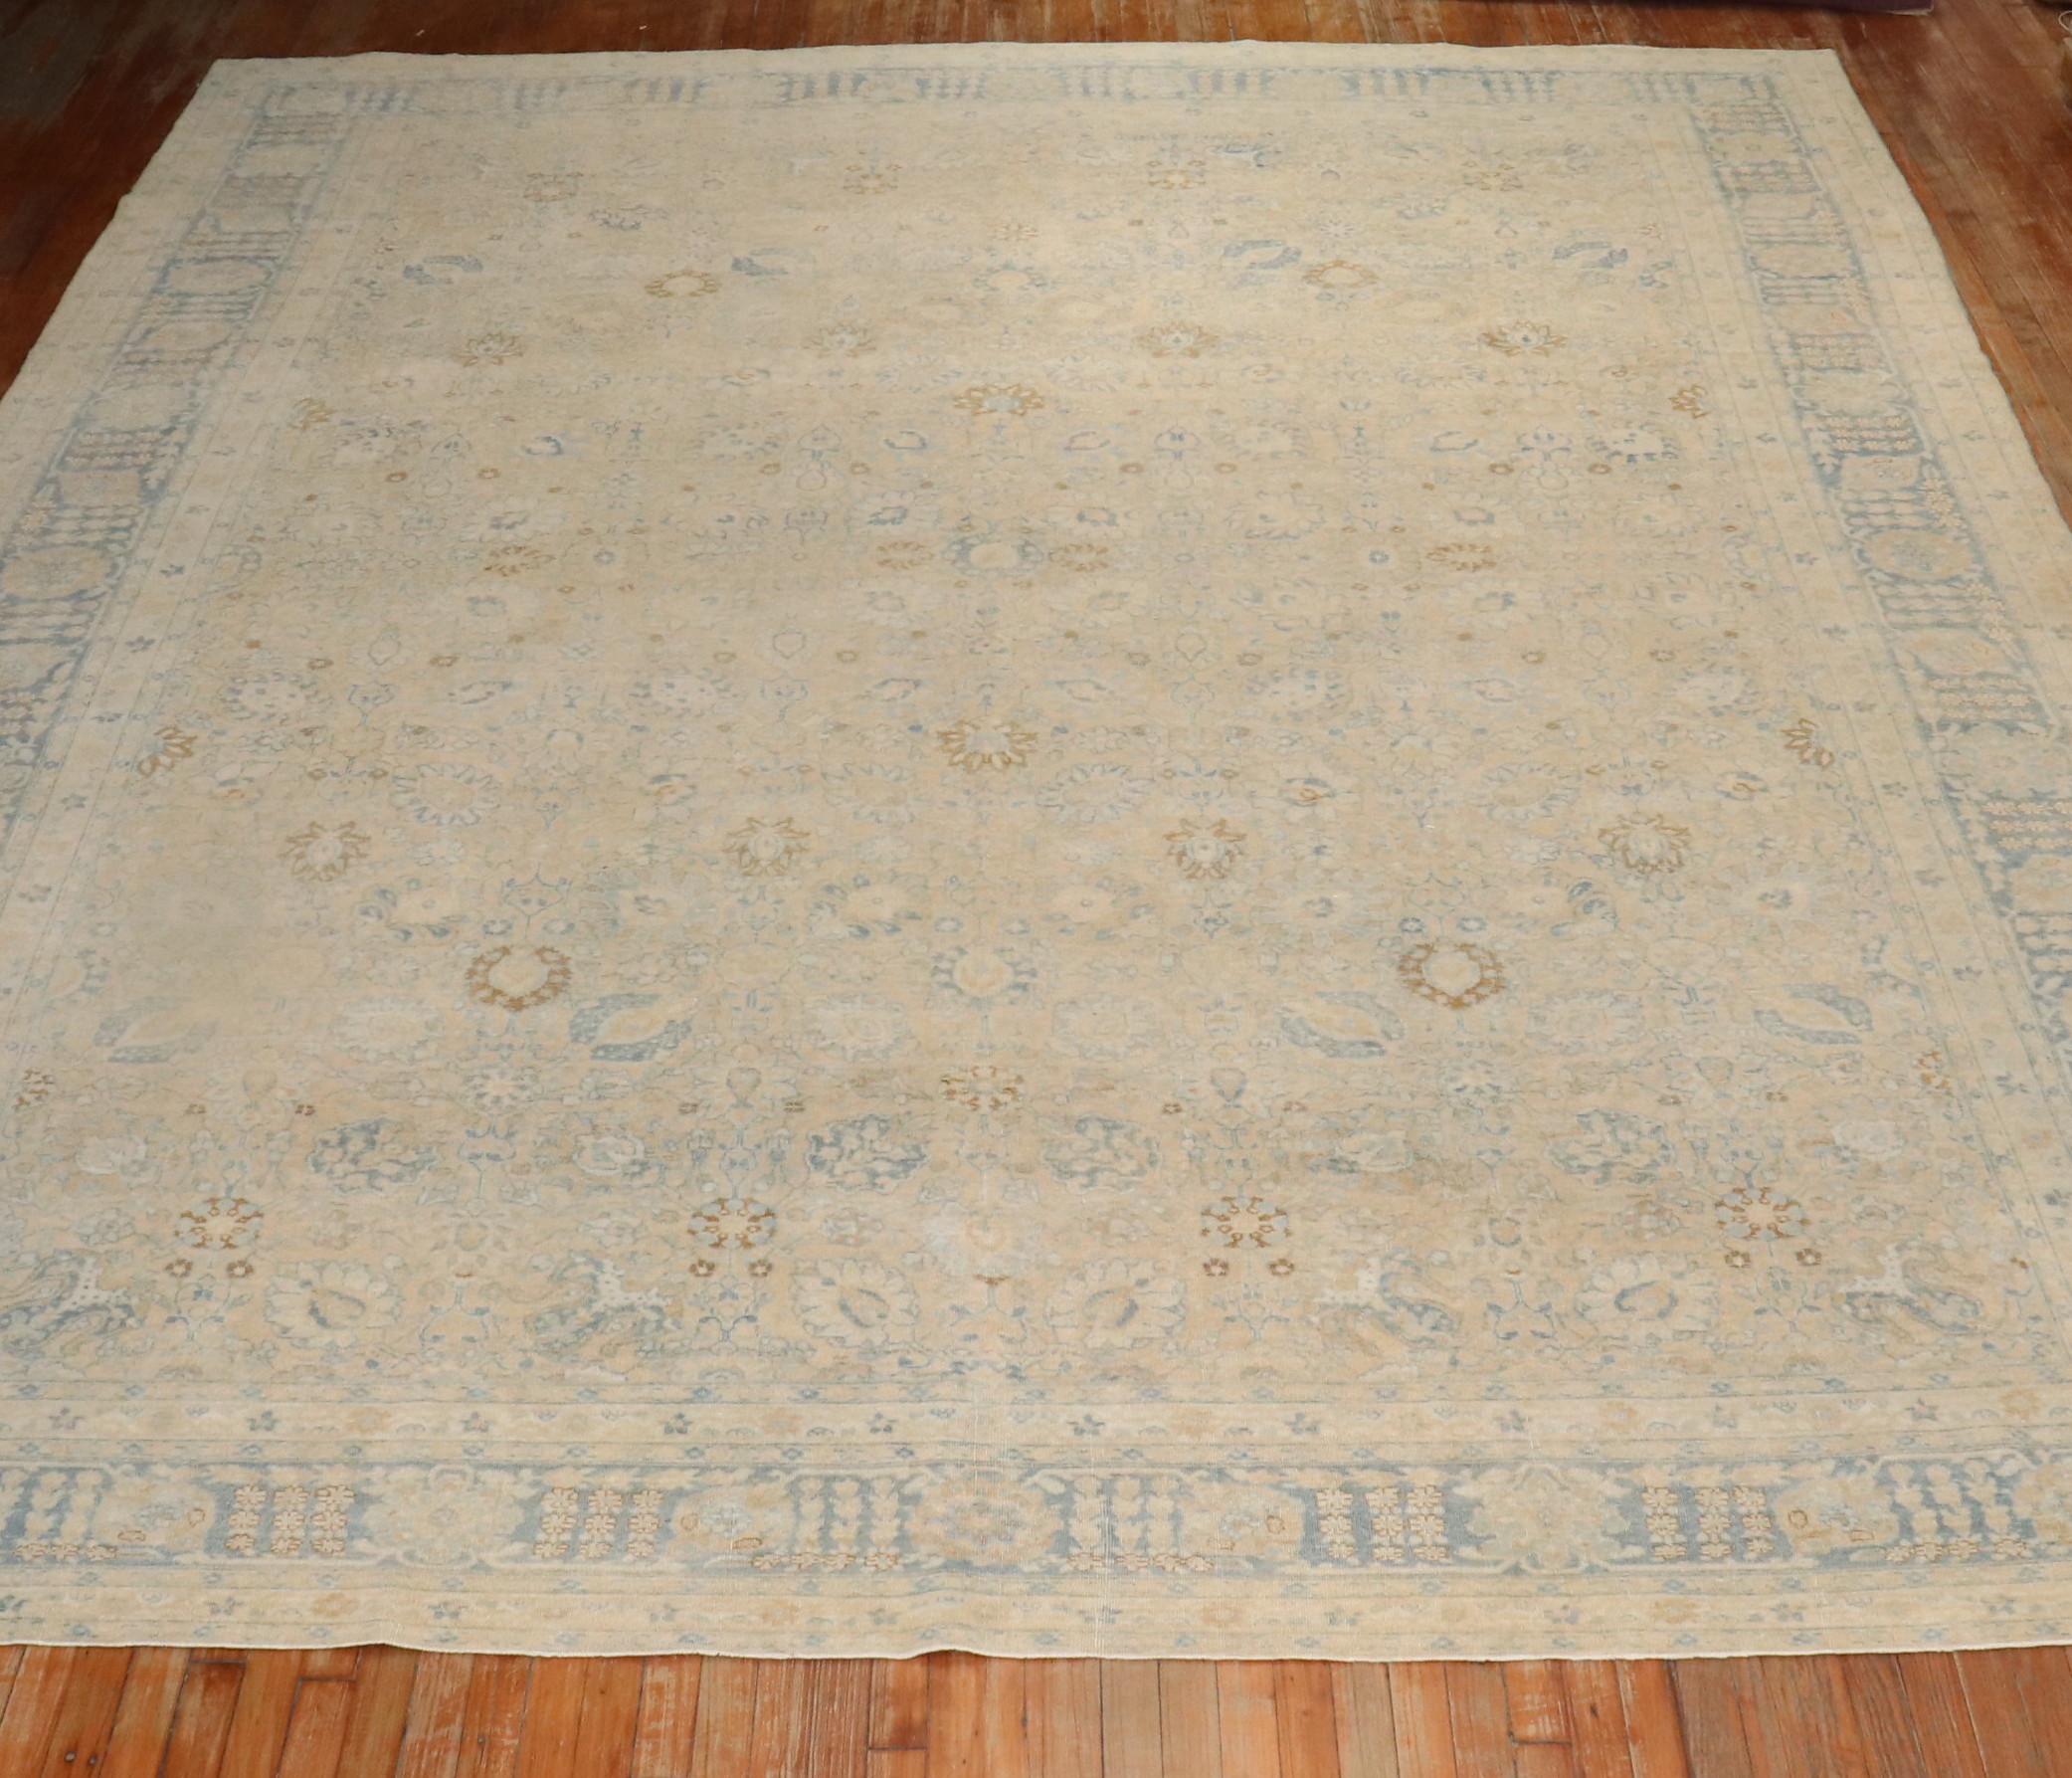 1920s large room size Persian Tabriz rug with an all-over design with light blue and cream accents on a butter color ground

Measures: 11'4'' x 14'.